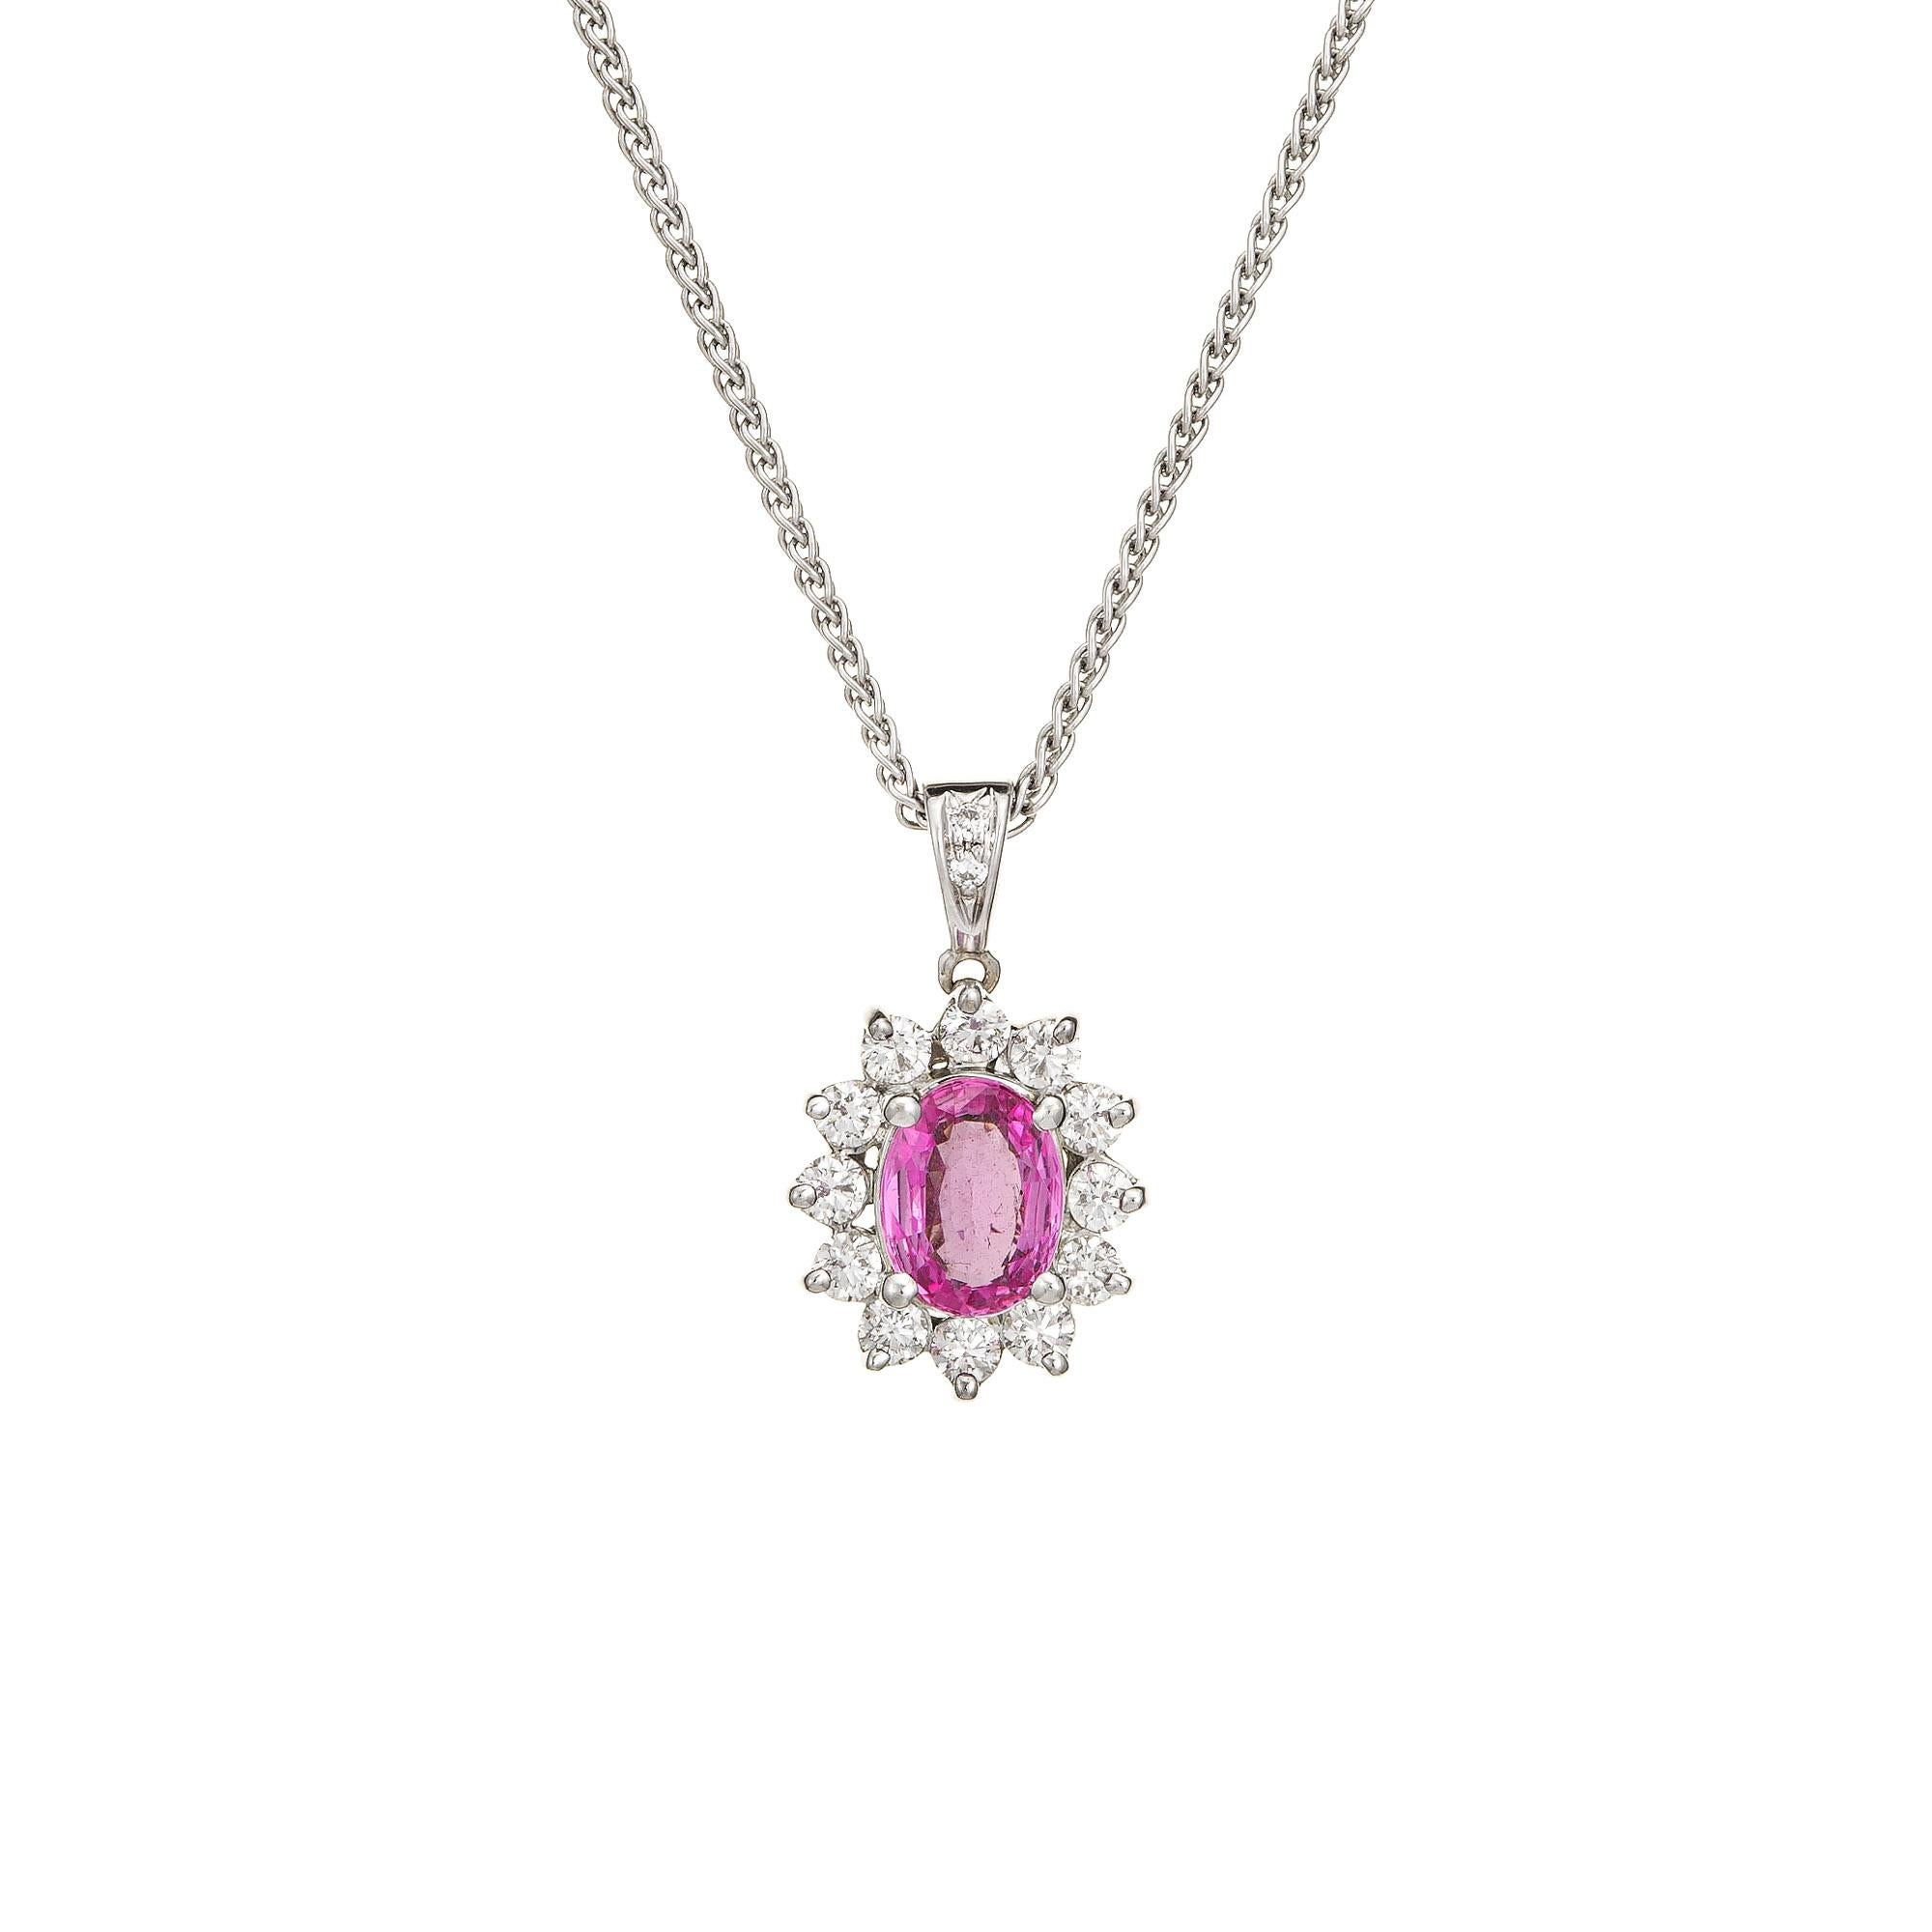 Oval Cut No Heat Natural Pink Sapphire Diamond Necklace 18k White Gold Vintage Jewelry For Sale